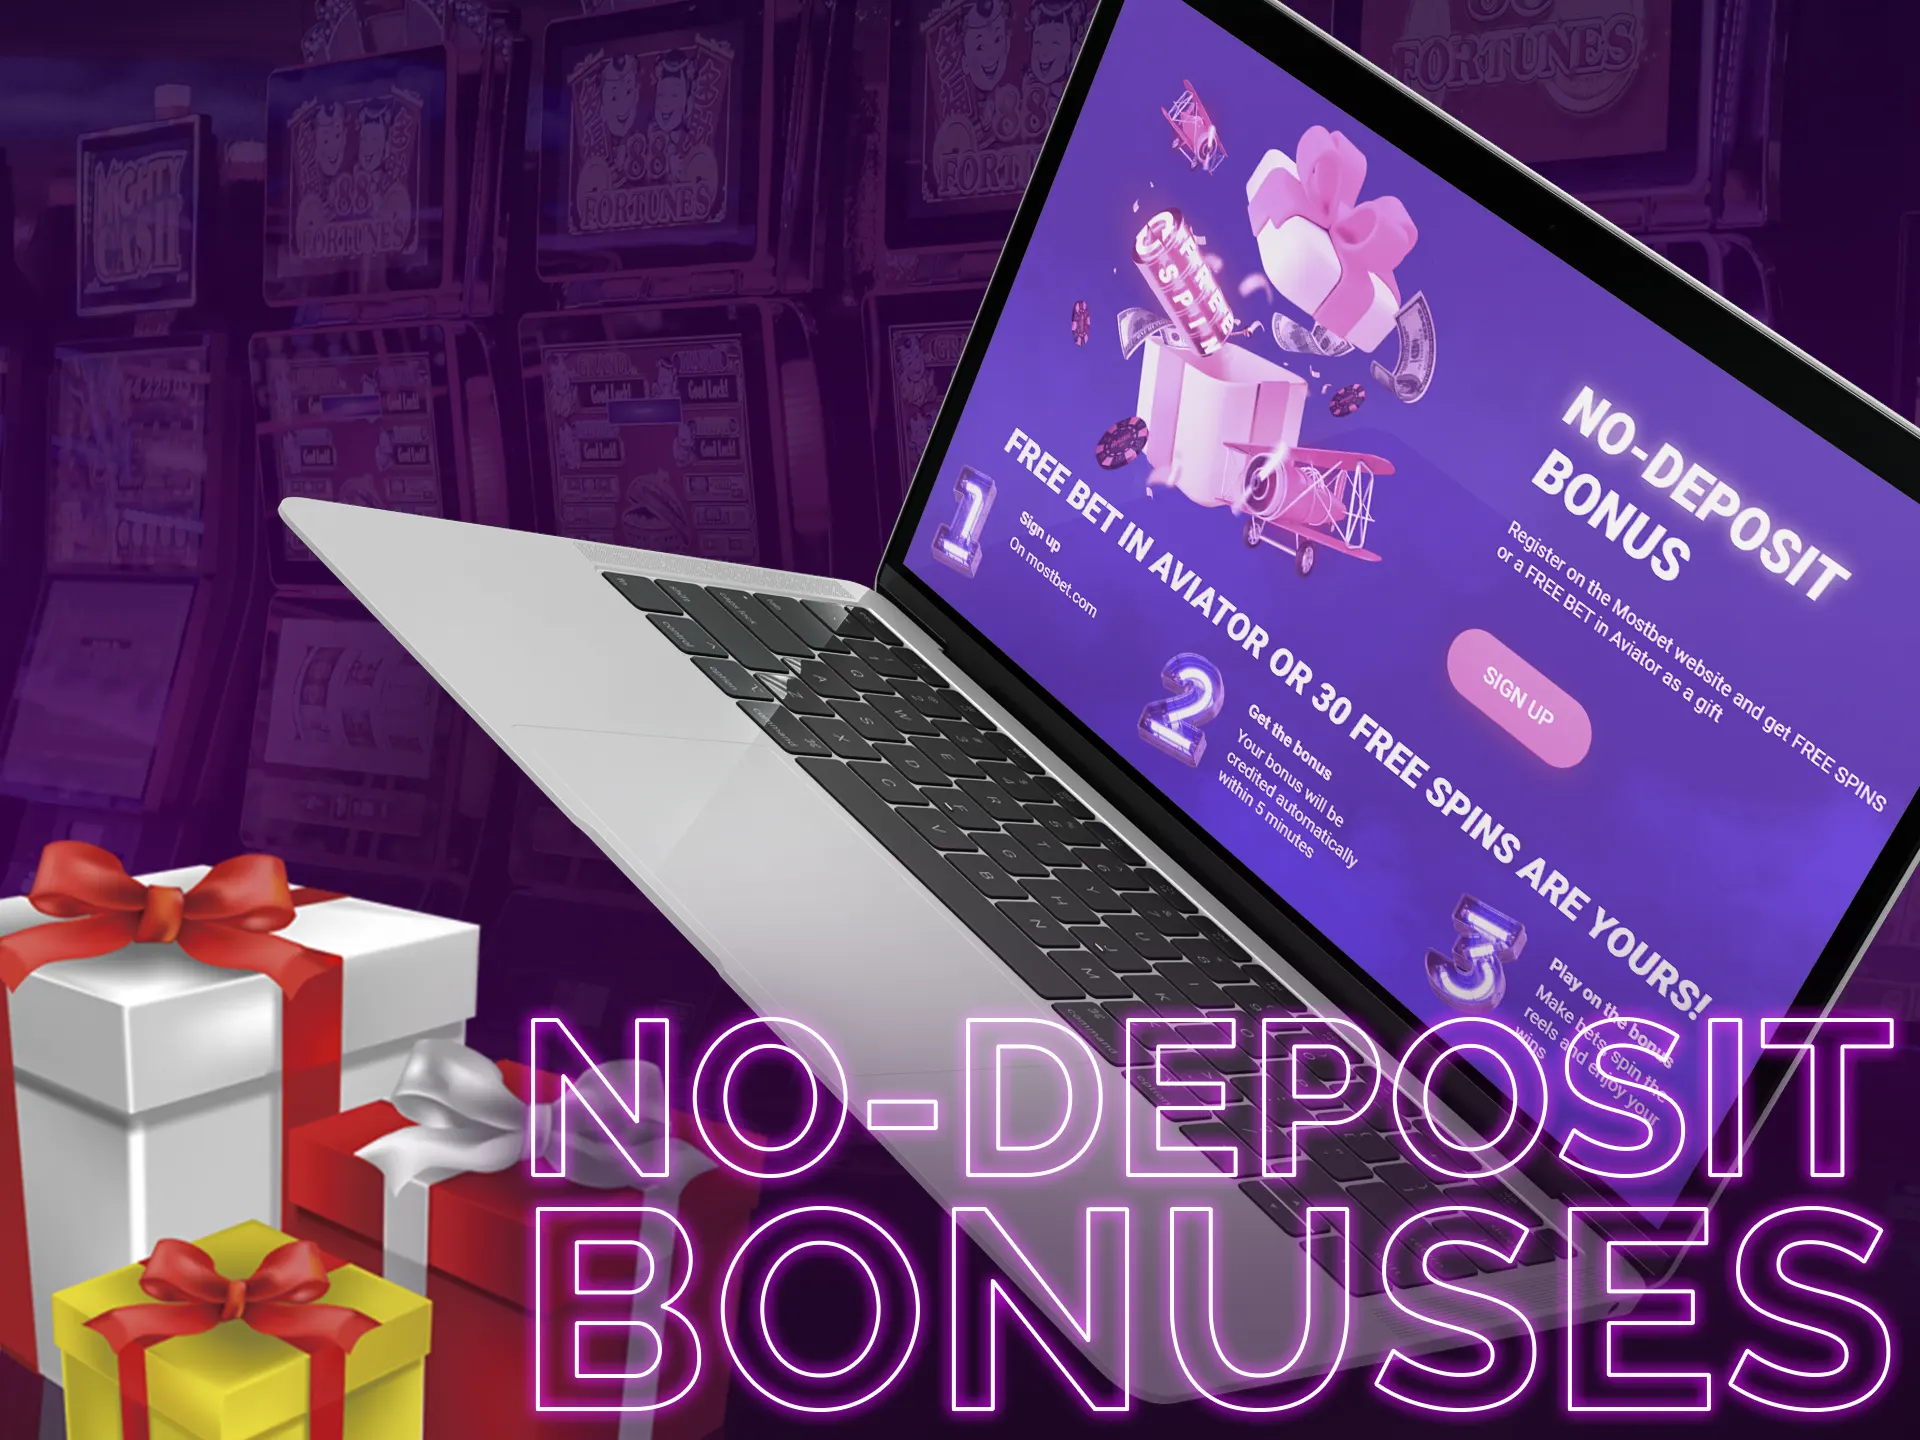 Try online casinos risk-free with no deposit bonuses, offering free credits or spins upon registration.